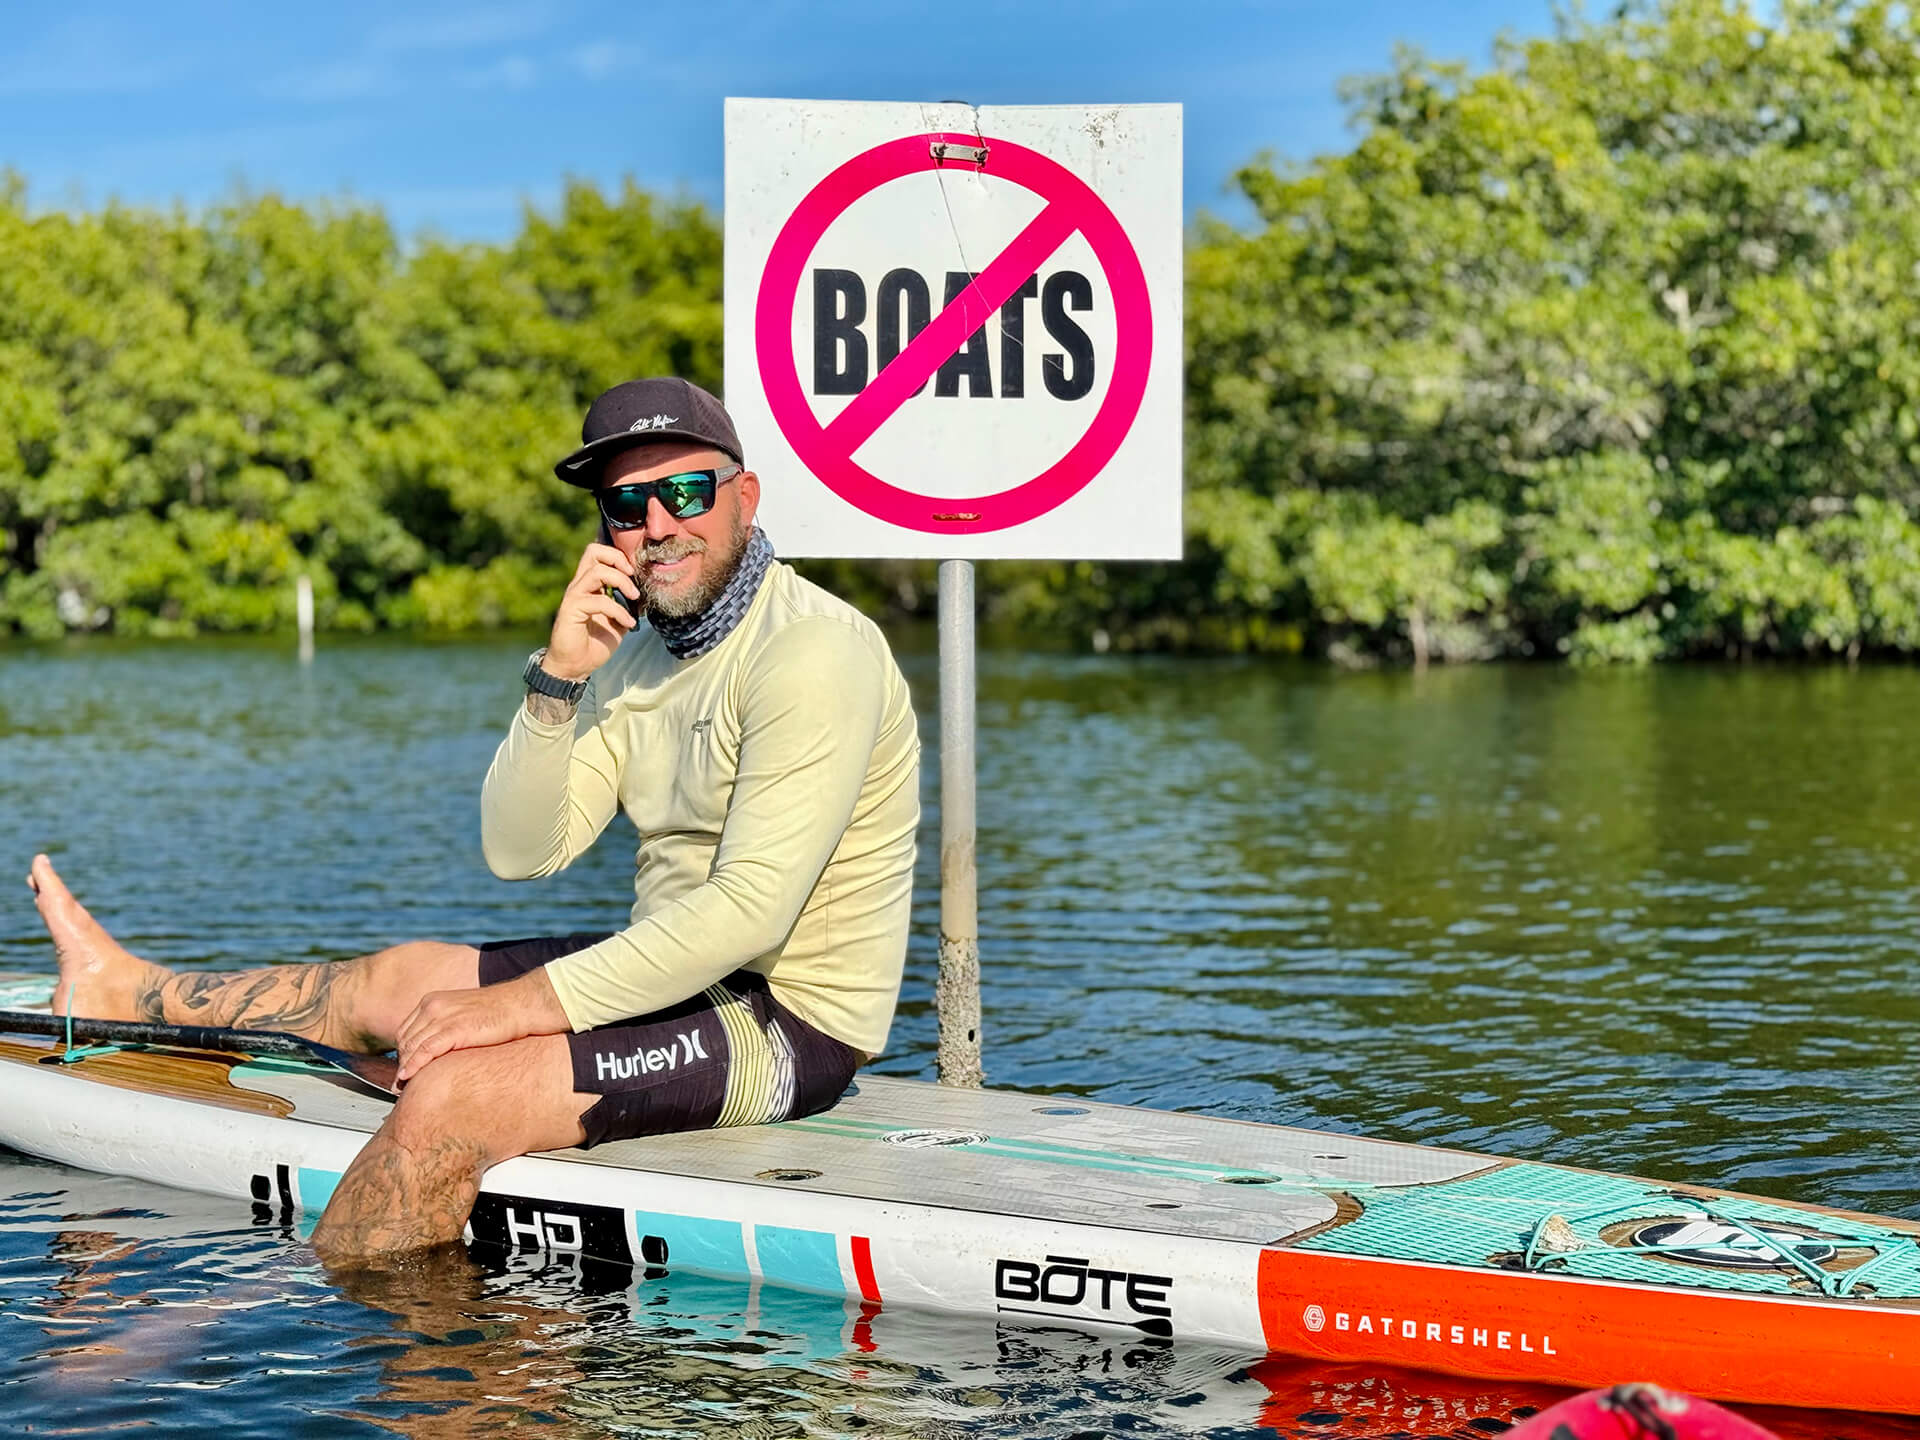 Chad on phone on his paddleboard in front of no boats sign